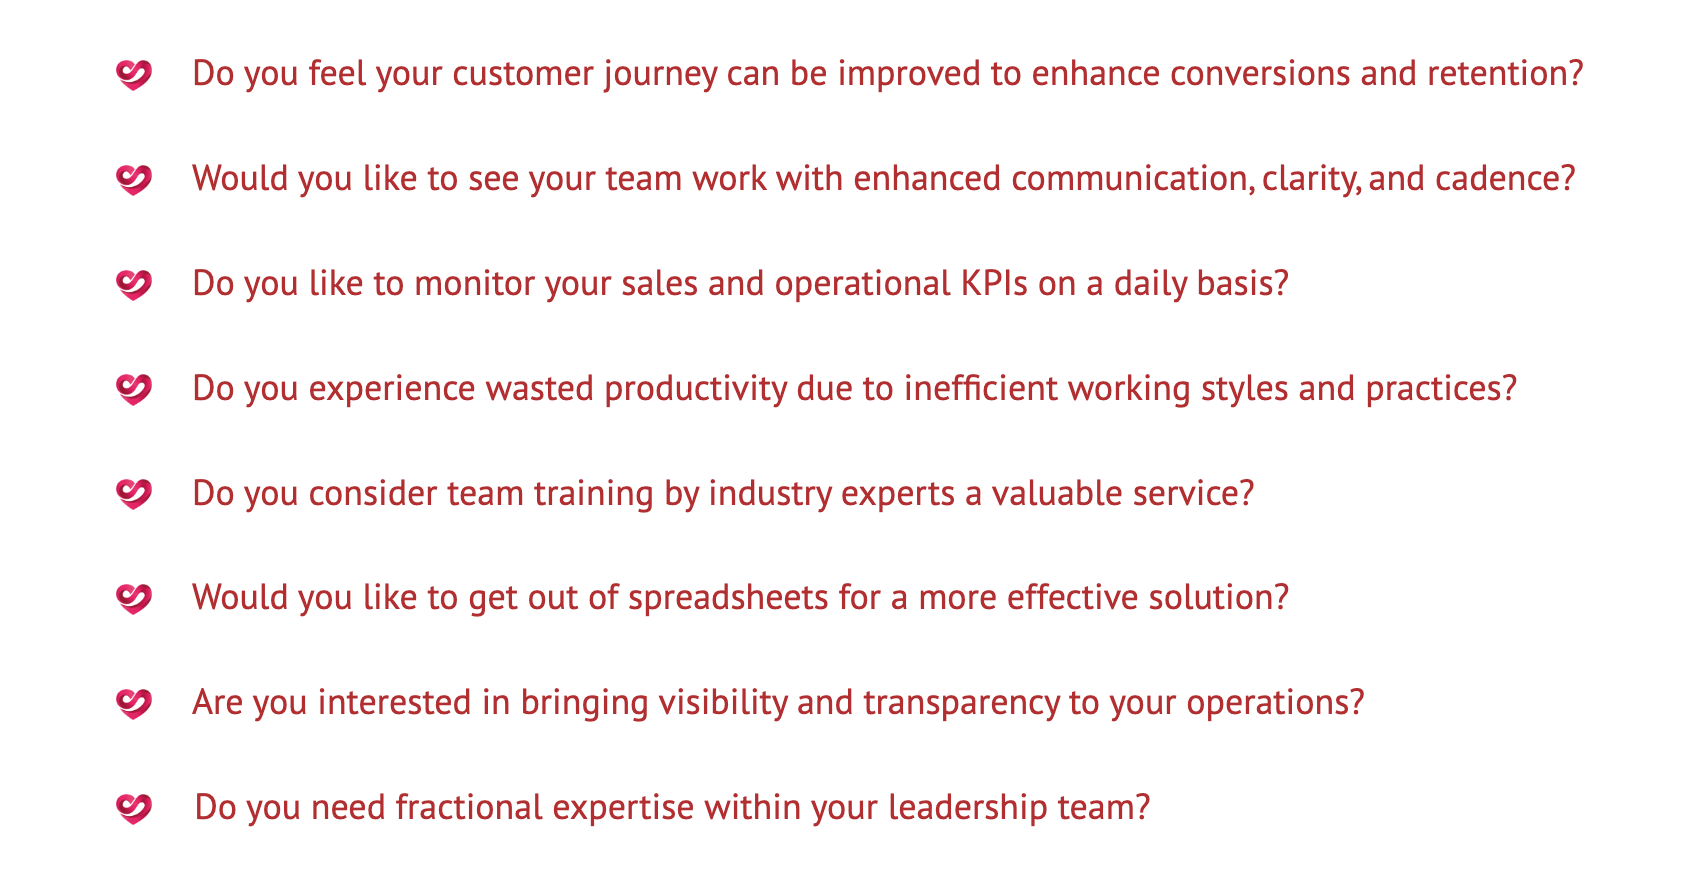 Enhance your customer journey, improve your team communication, and track your operations with KPI dashboards.